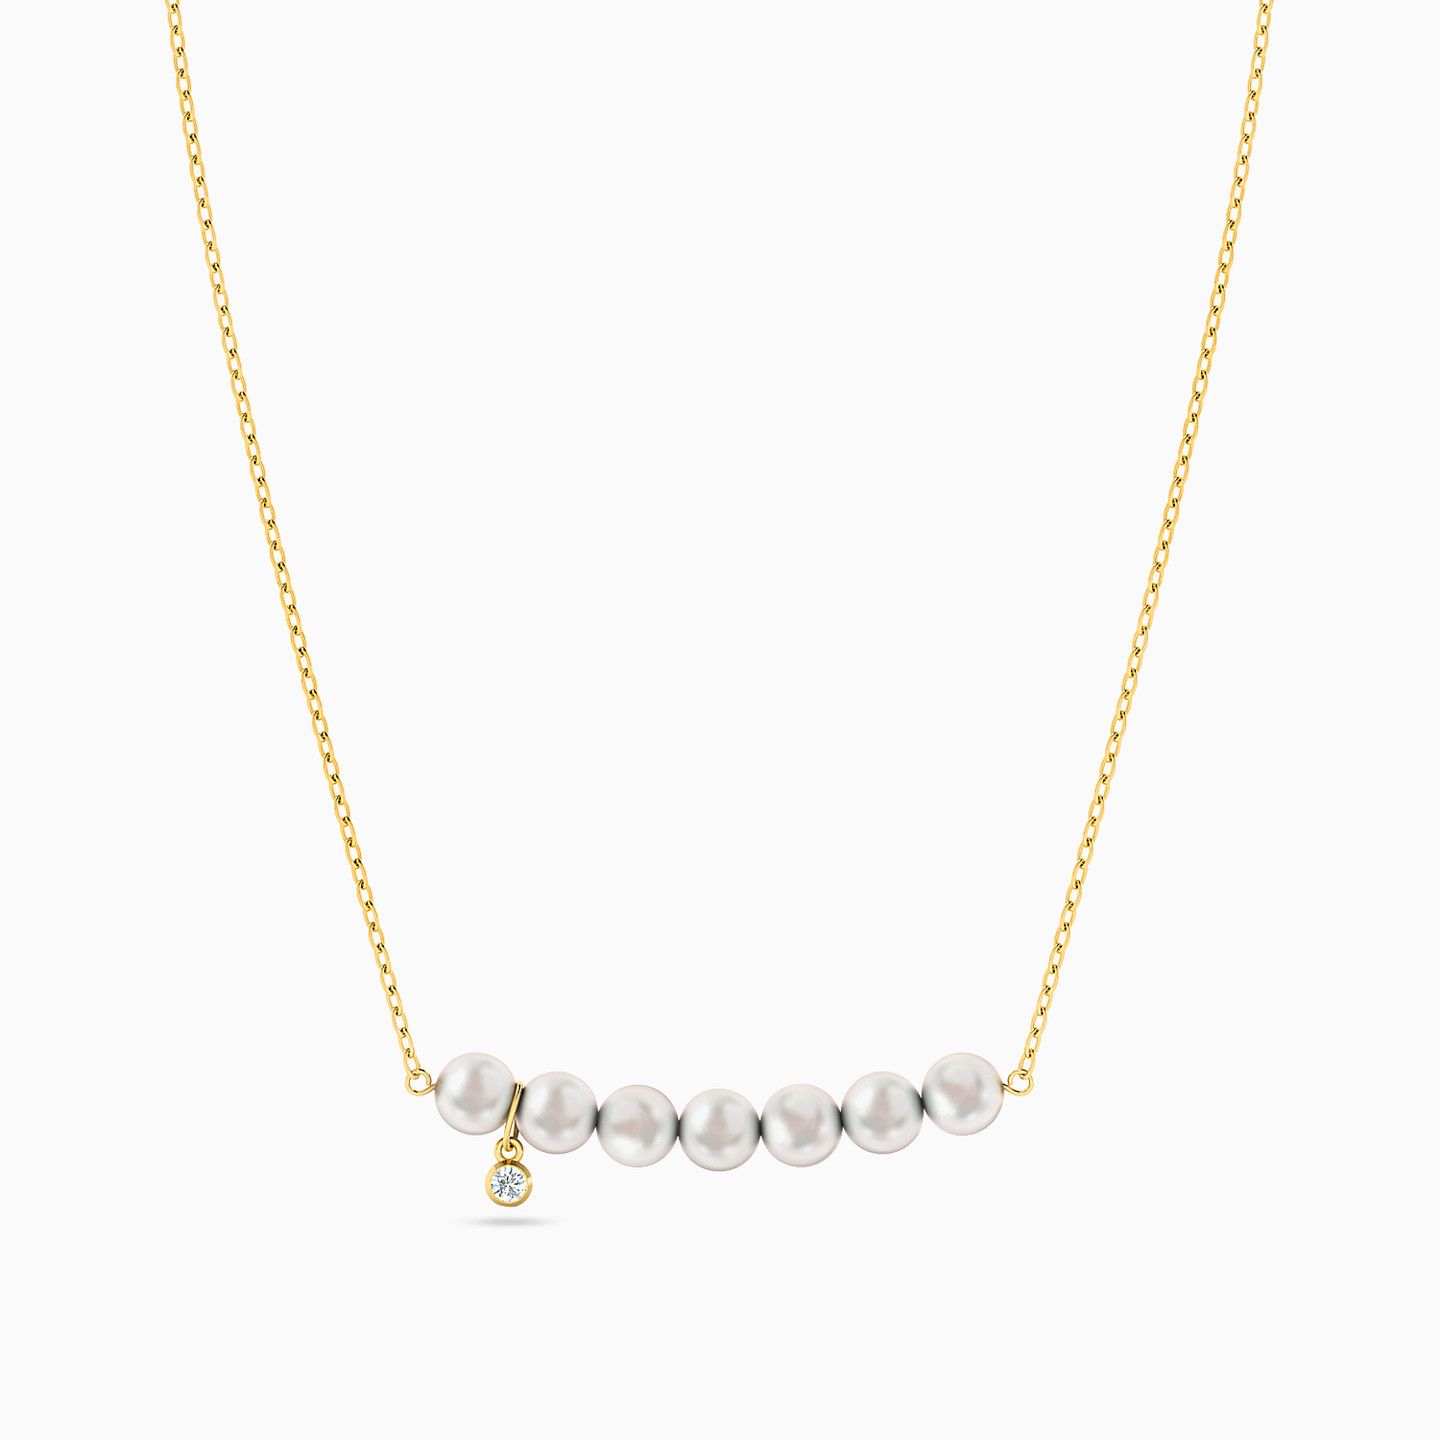 18K Gold Pearls Chain Necklace - 3